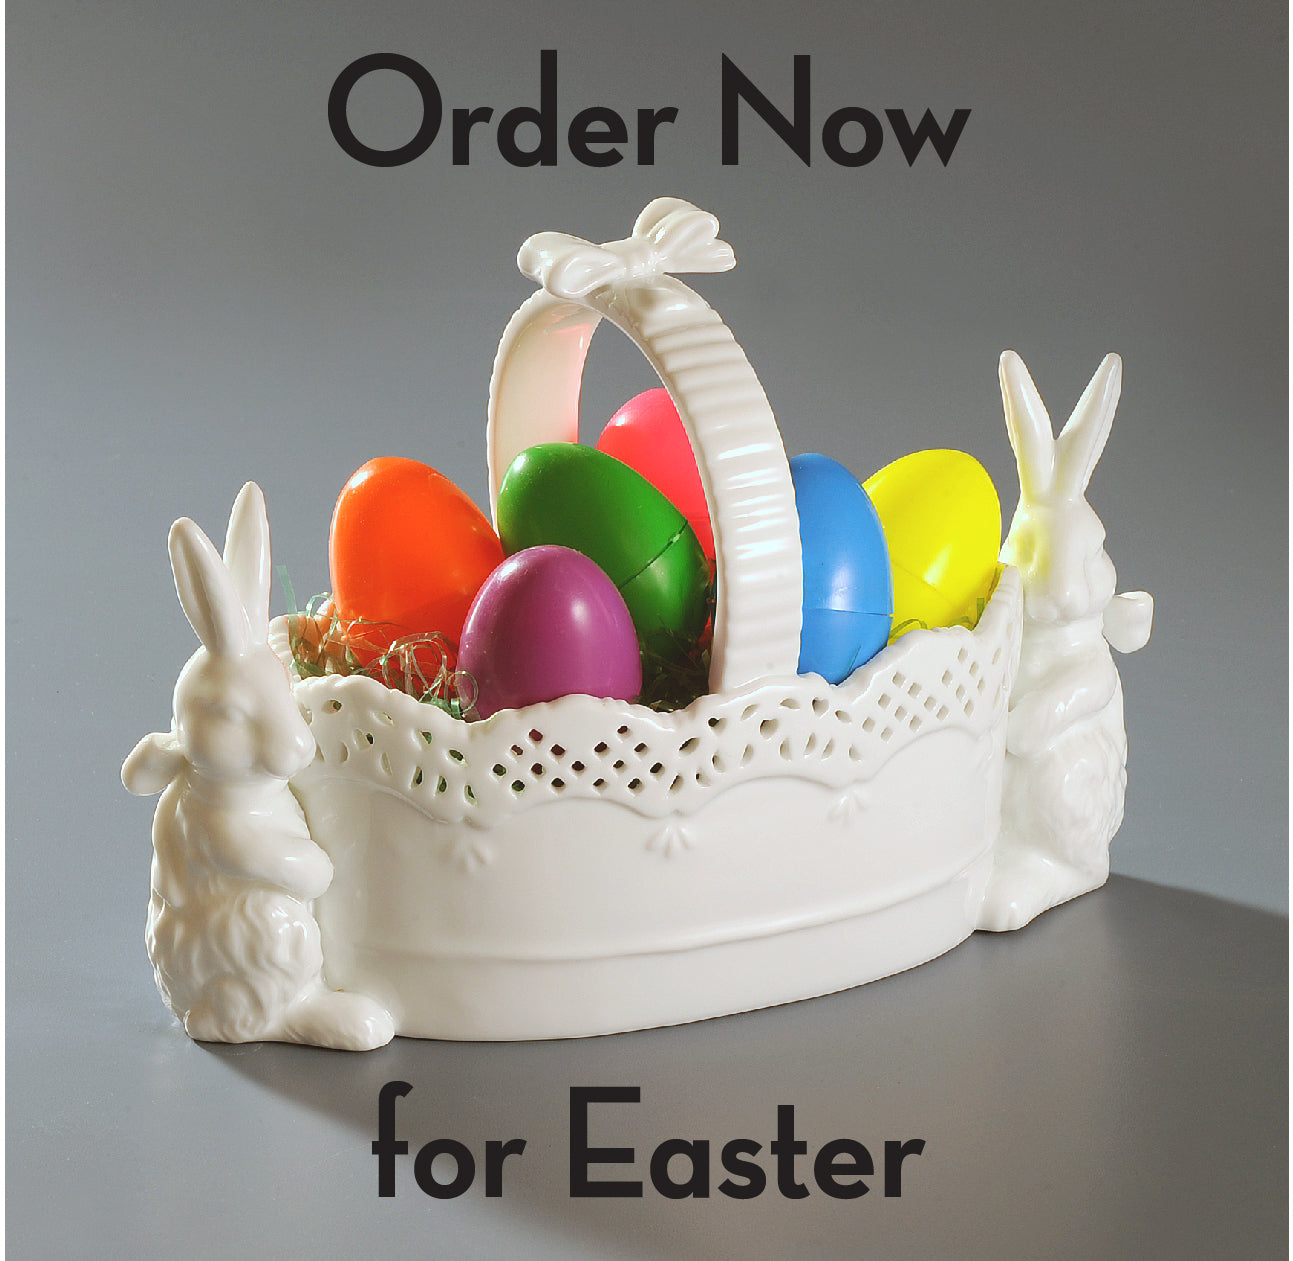 order now for easter